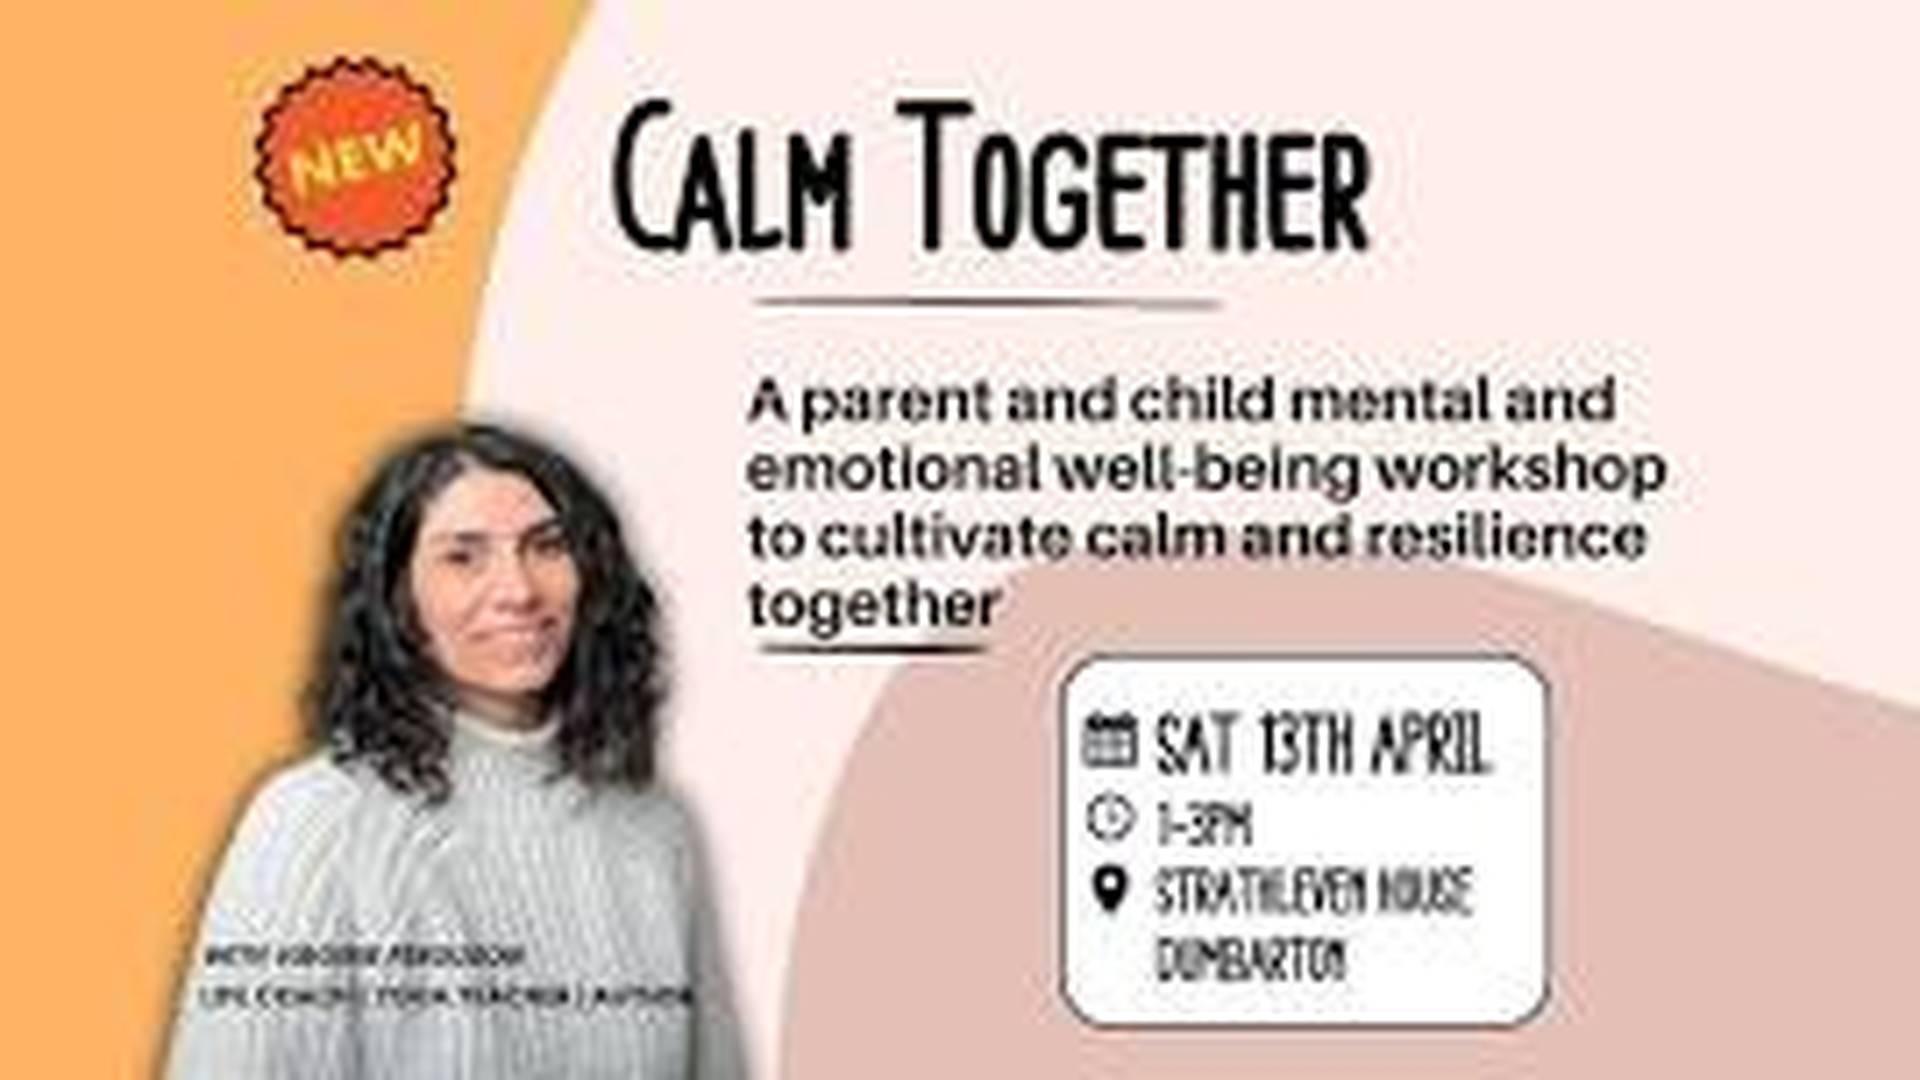 CALM TOGETHER - A parent-child workshop to cultivate calm and resilience together photo